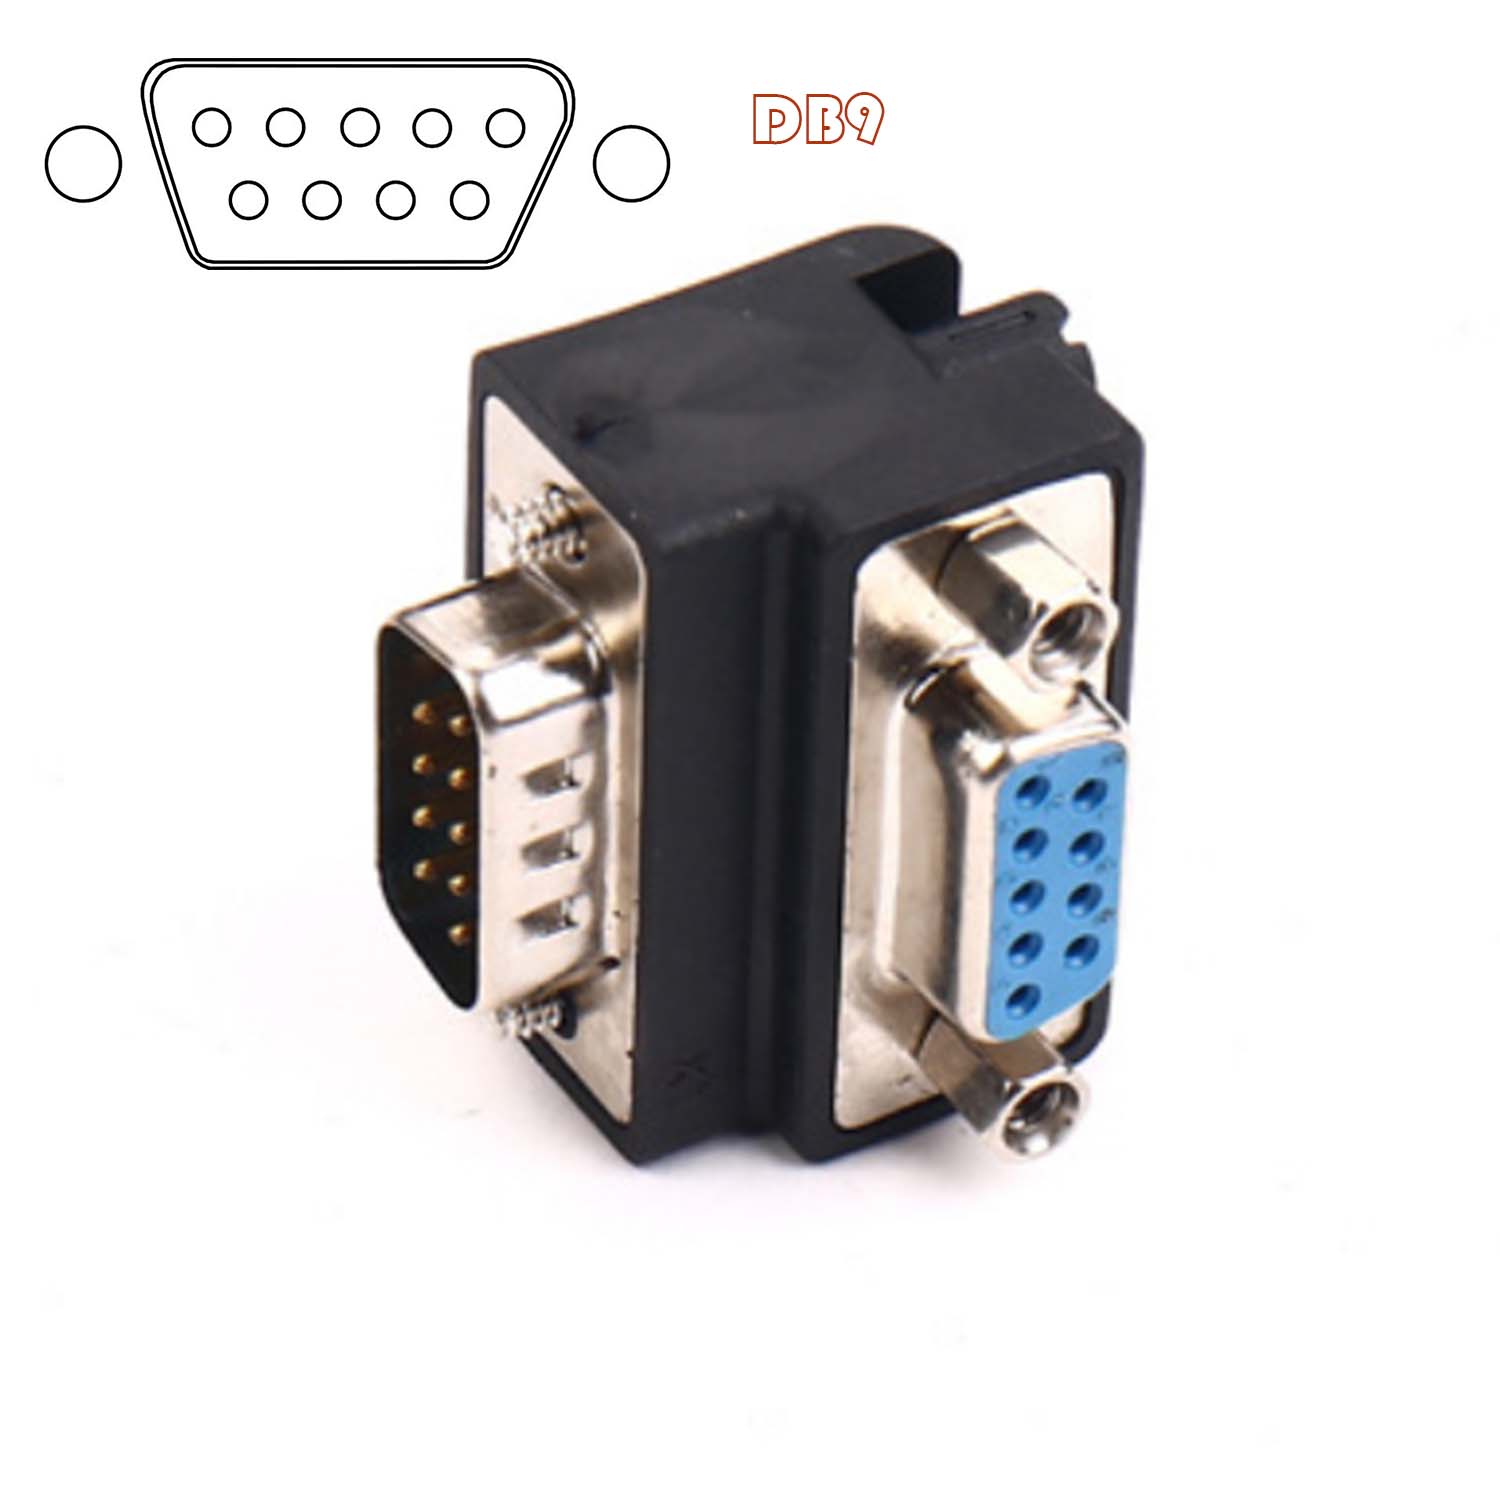 Angle 90 Degree DB 9 pin 9pin DB9 RS232 Male To Female Extension Cable Adapter convertor